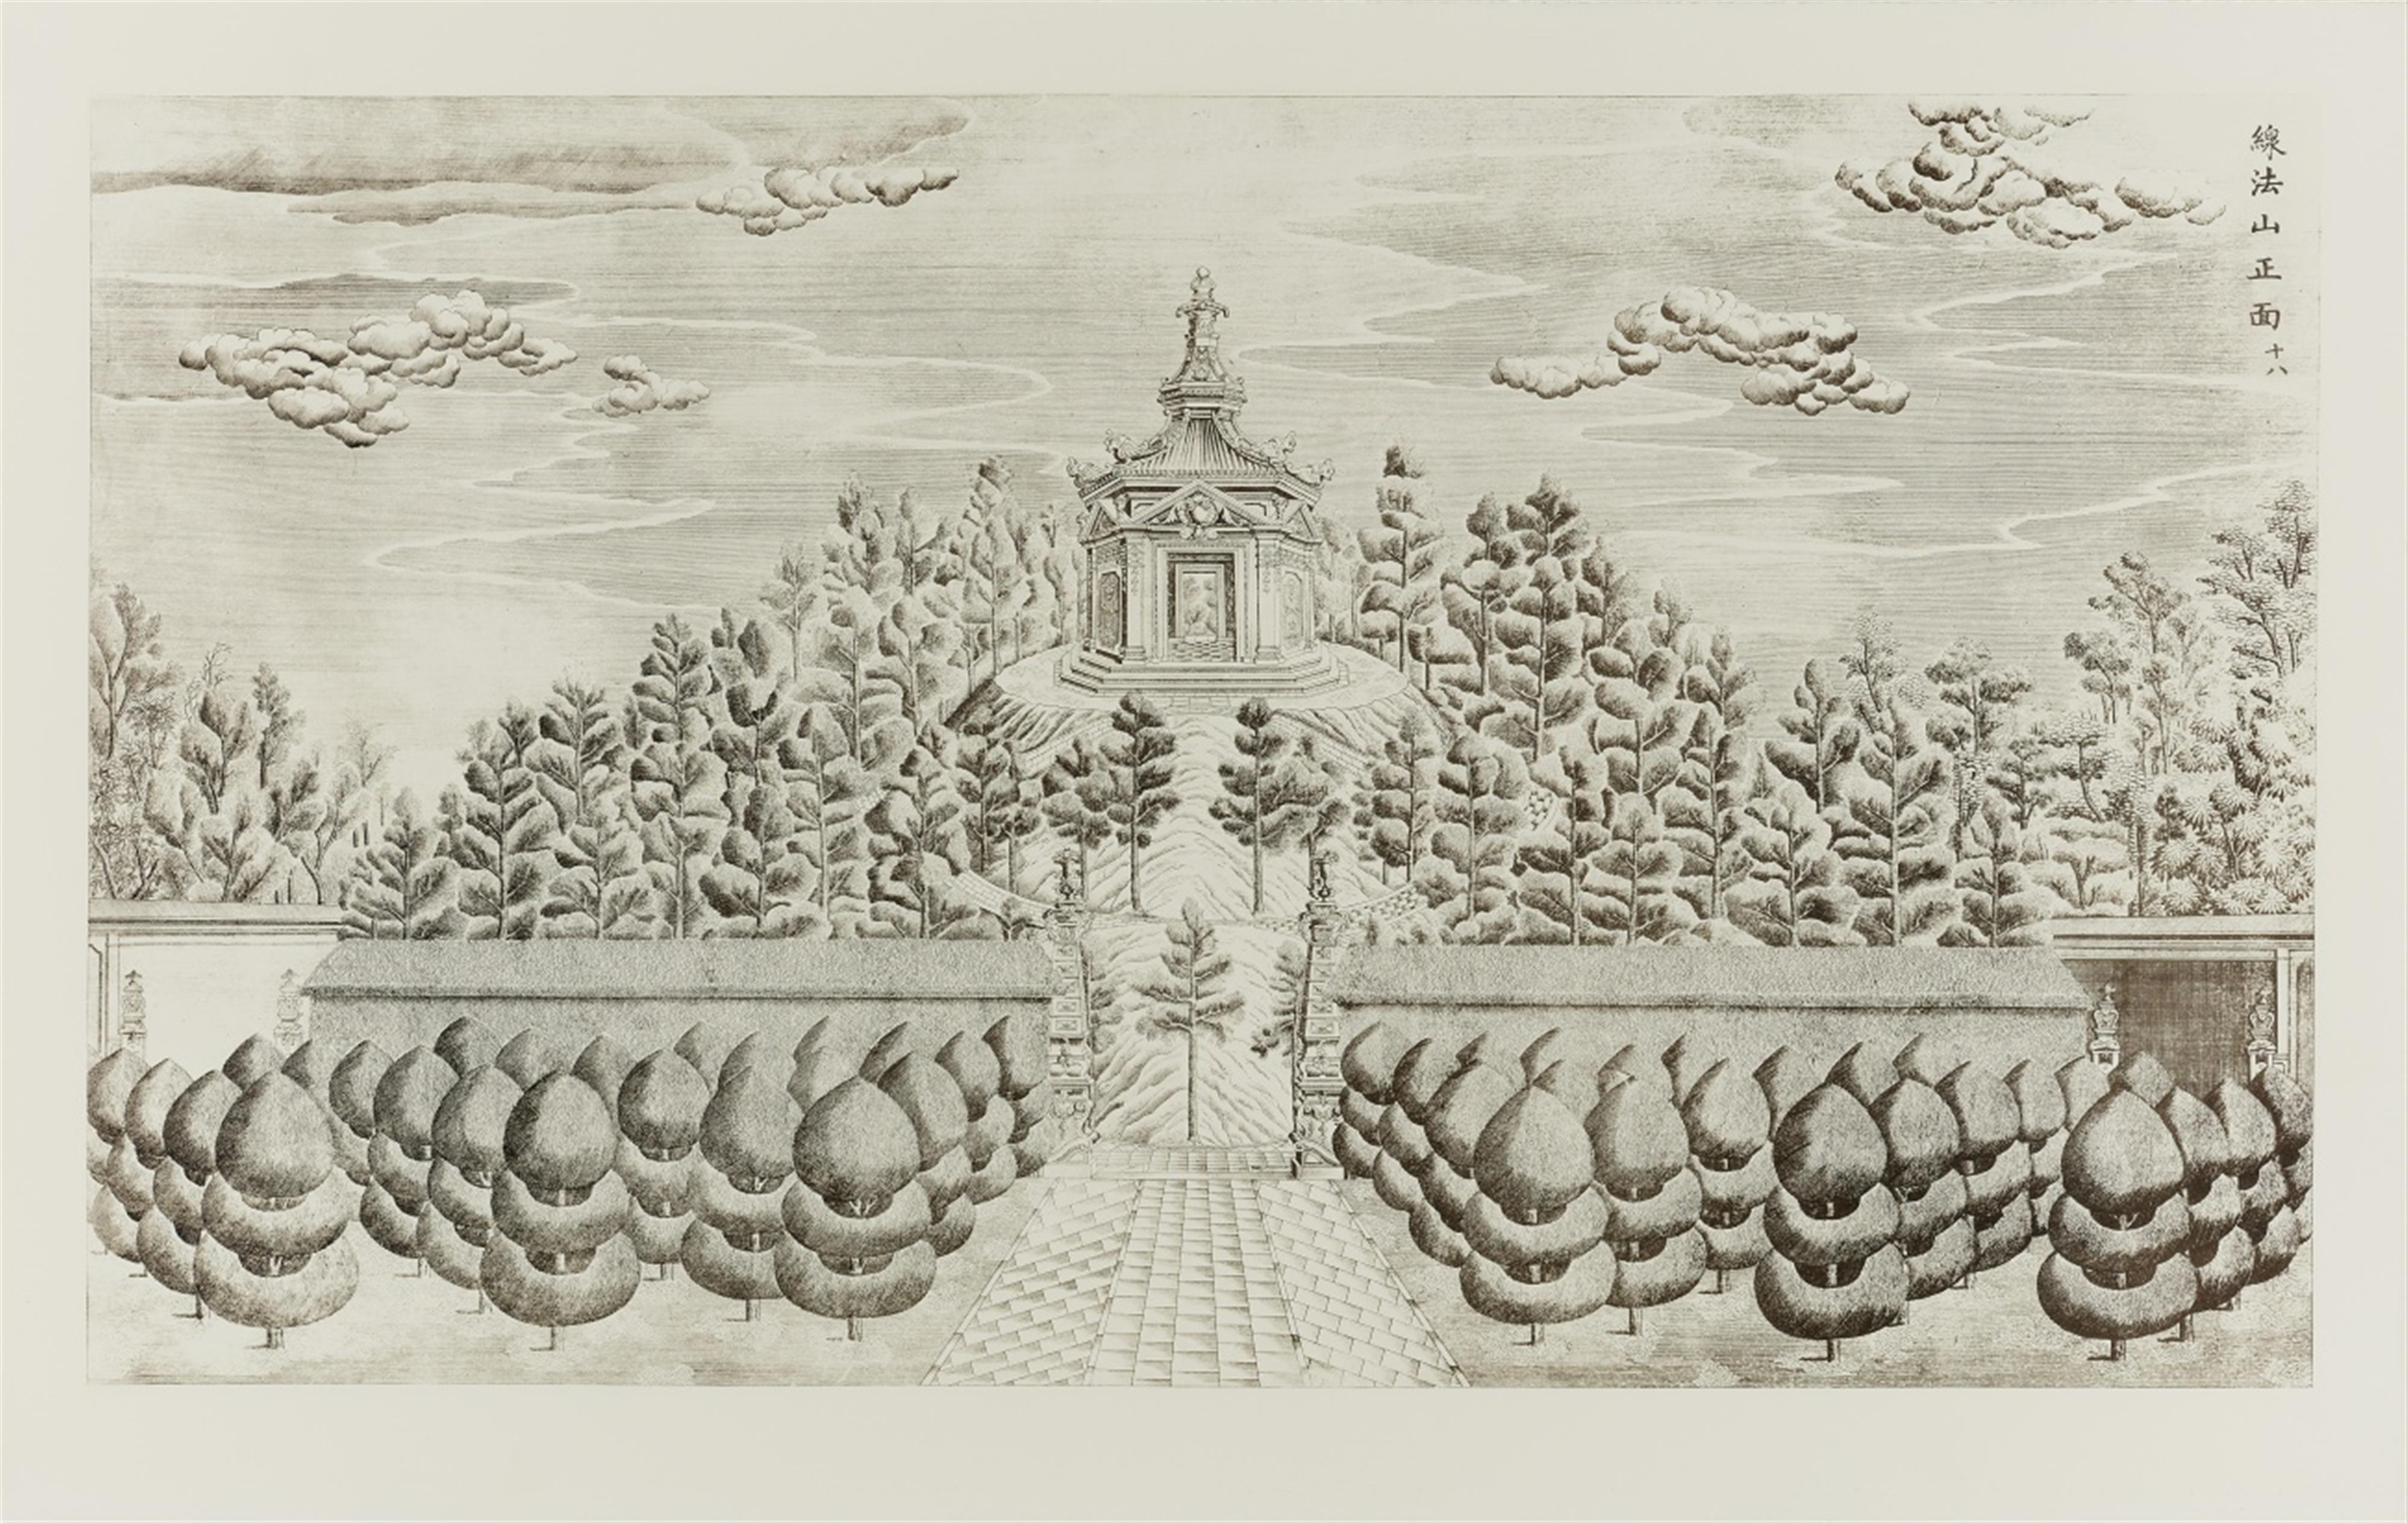 After Yi Lantai . 20th century - Sixteen etchings on wove paper depicting palaces, pavilions and gardens created by Giuseppe Castiglione in the Xiyang Lou (Western mansions) on the imperial grounds of the Old S... - image-11